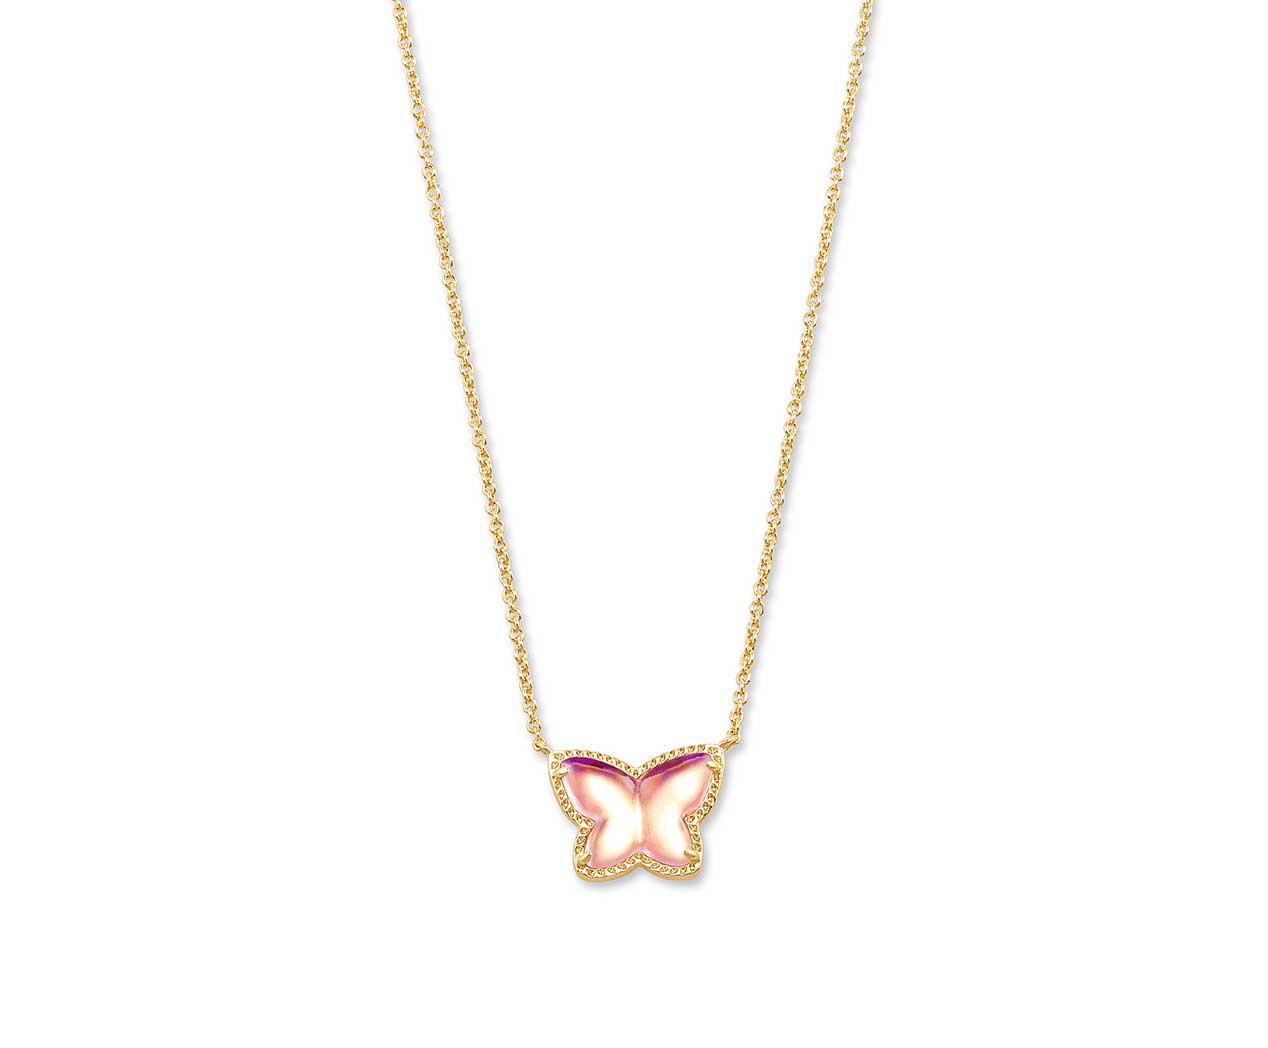 Kendra Scott Lillia Butterfly Gold Pendant Necklace to support the Breast Cancer Research Foundation